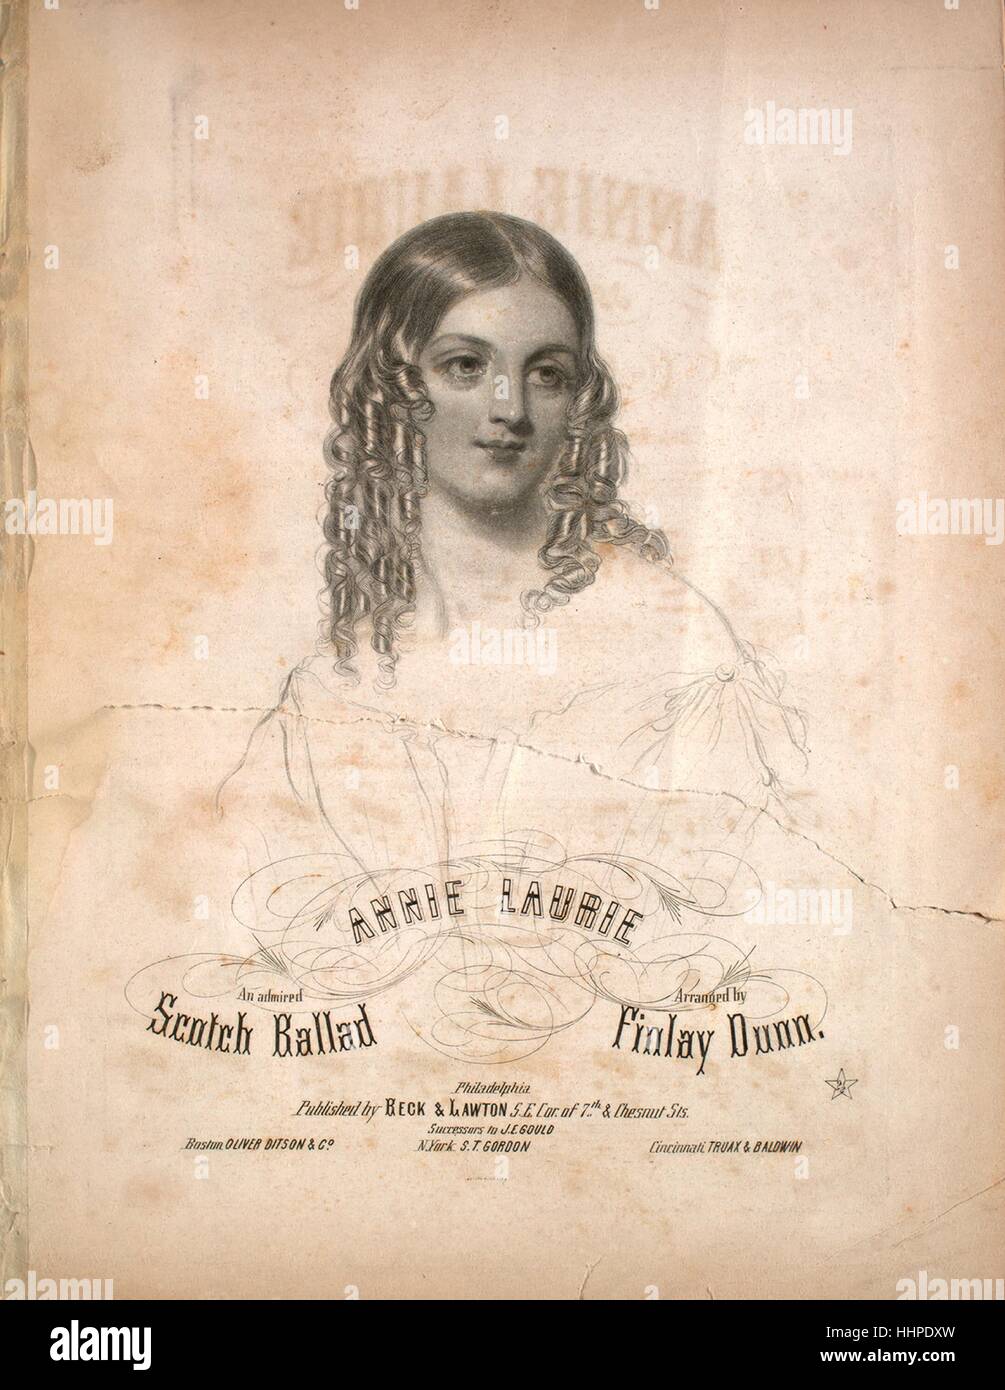 Sheet music cover image of the song 'Annie Laurie An Admired Scotch Ballad', with original authorship notes reading 'Arranged by Finlay Dunn', United States, 1900. The publisher is listed as 'Beck and Lawton, S.E. Cor. of 7th and Chesnut Sts.', the form of composition is 'strophic', the instrumentation is 'piano and voice', the first line reads 'Maxwelton braes are bonnie, where early fa's the dew', and the illustration artist is listed as 'Swain Engvr.'. Stock Photo